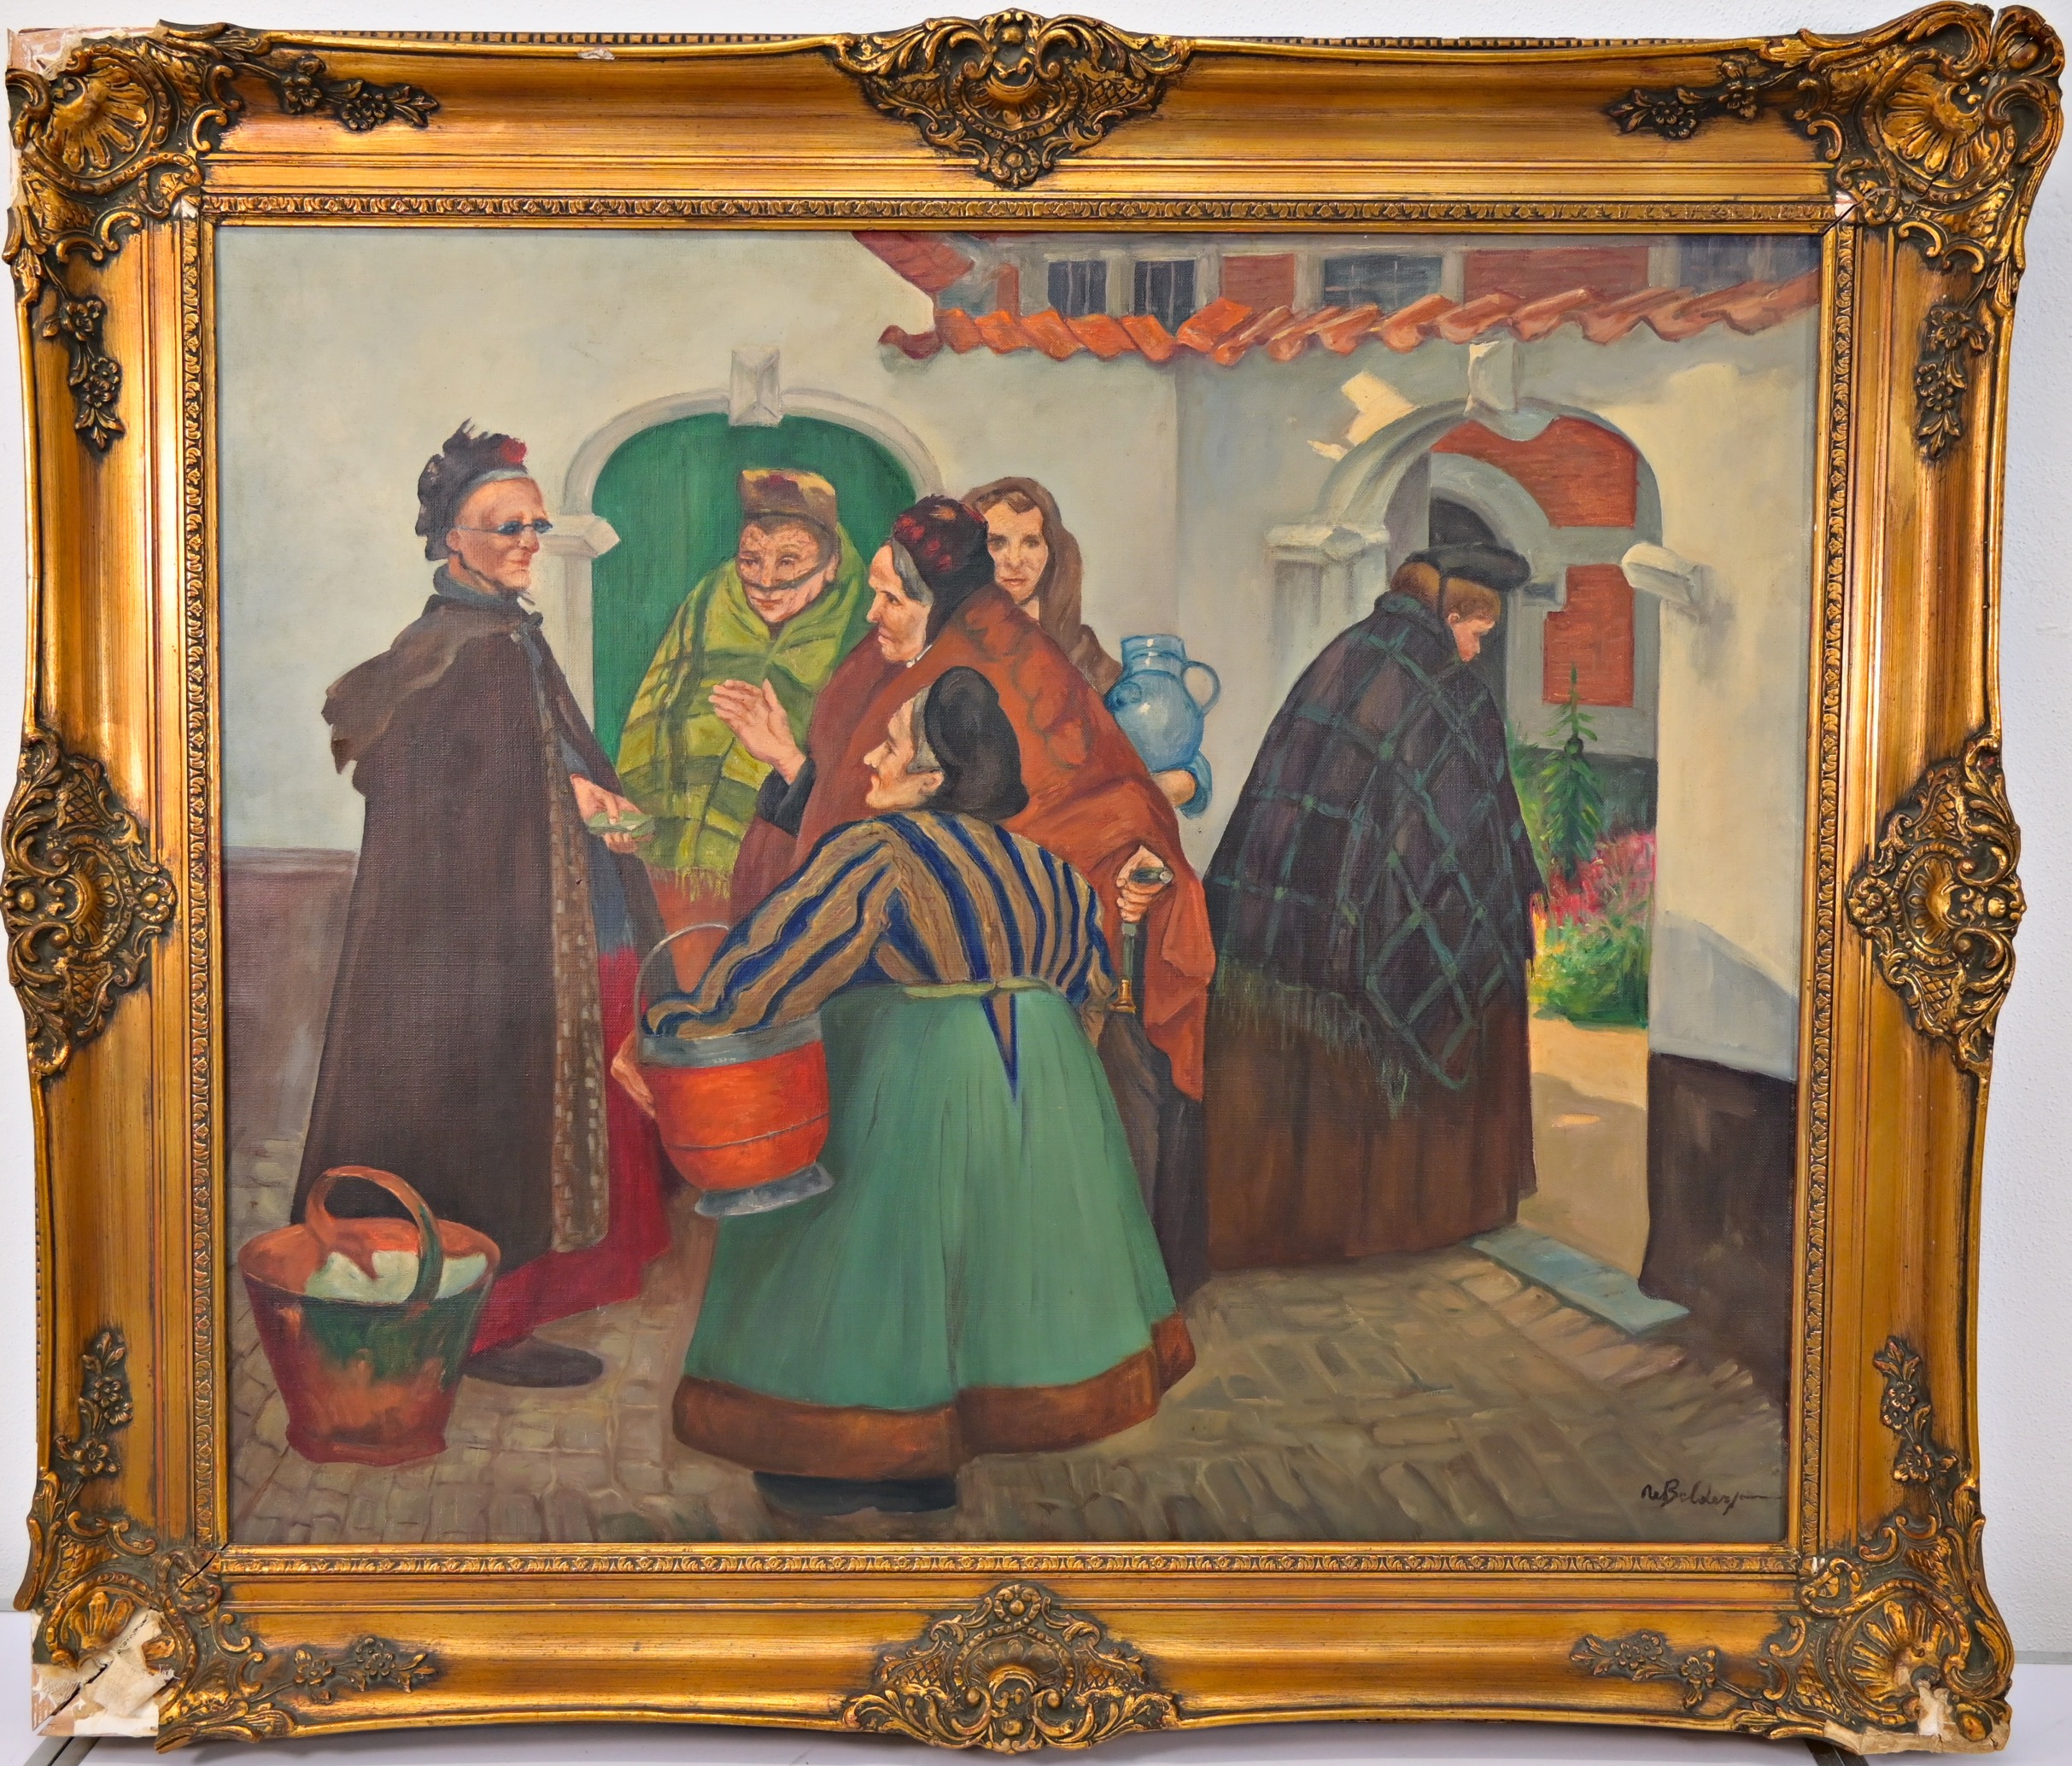 Painting, oil on canvas, France, first half of the 20th century. Signed by the artist Belder. - Image 2 of 5